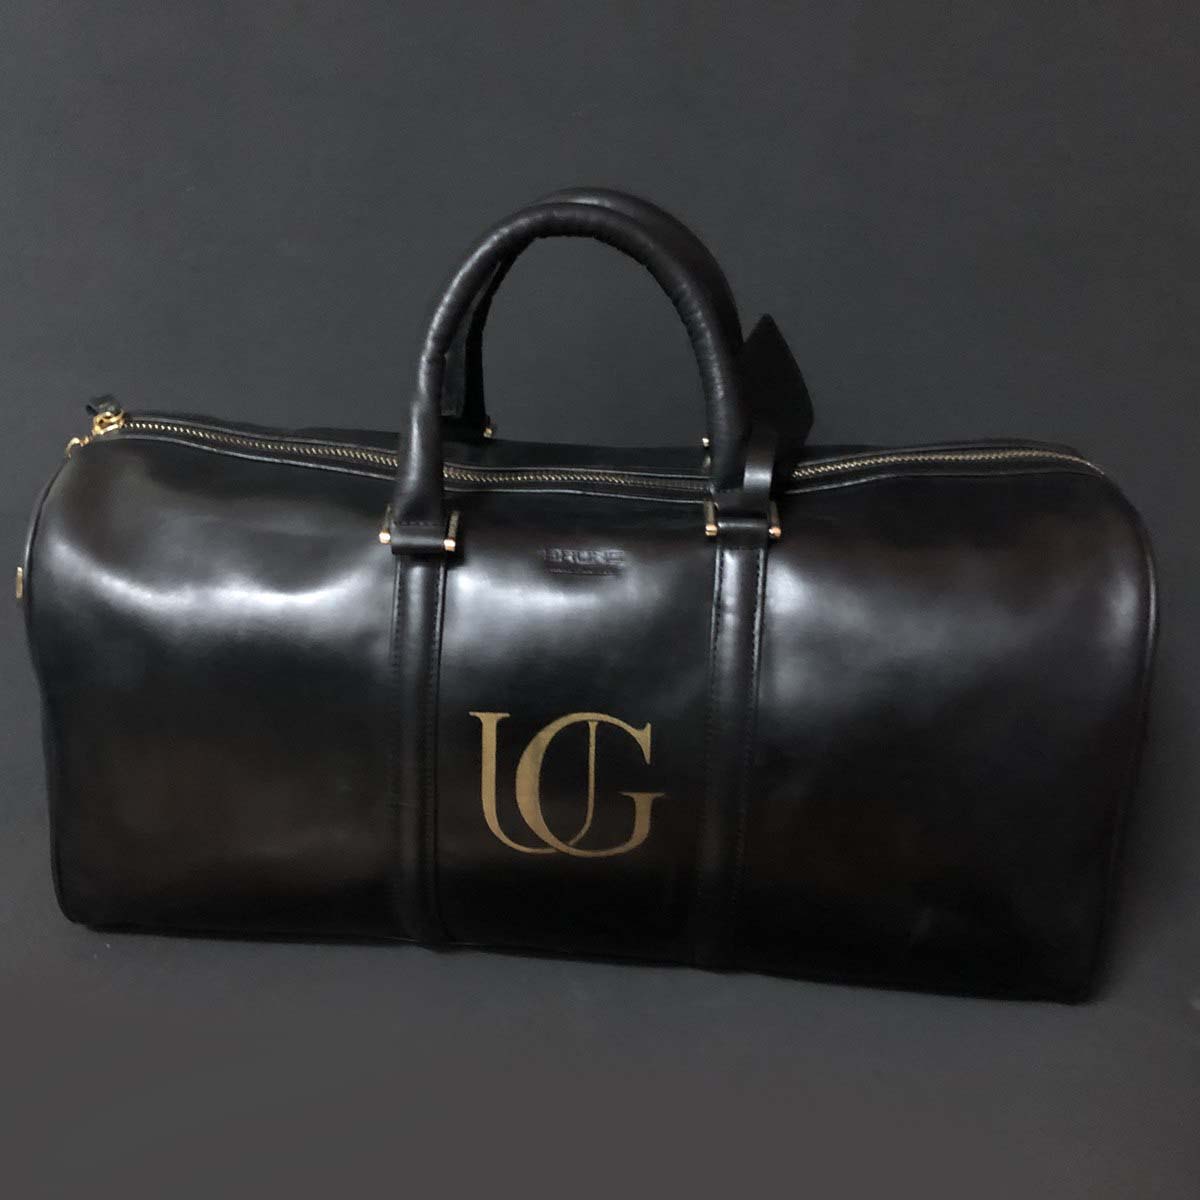 Handmade Classy Black Leather Duffle Bag with Your Name Initials by Brune & Bareskin